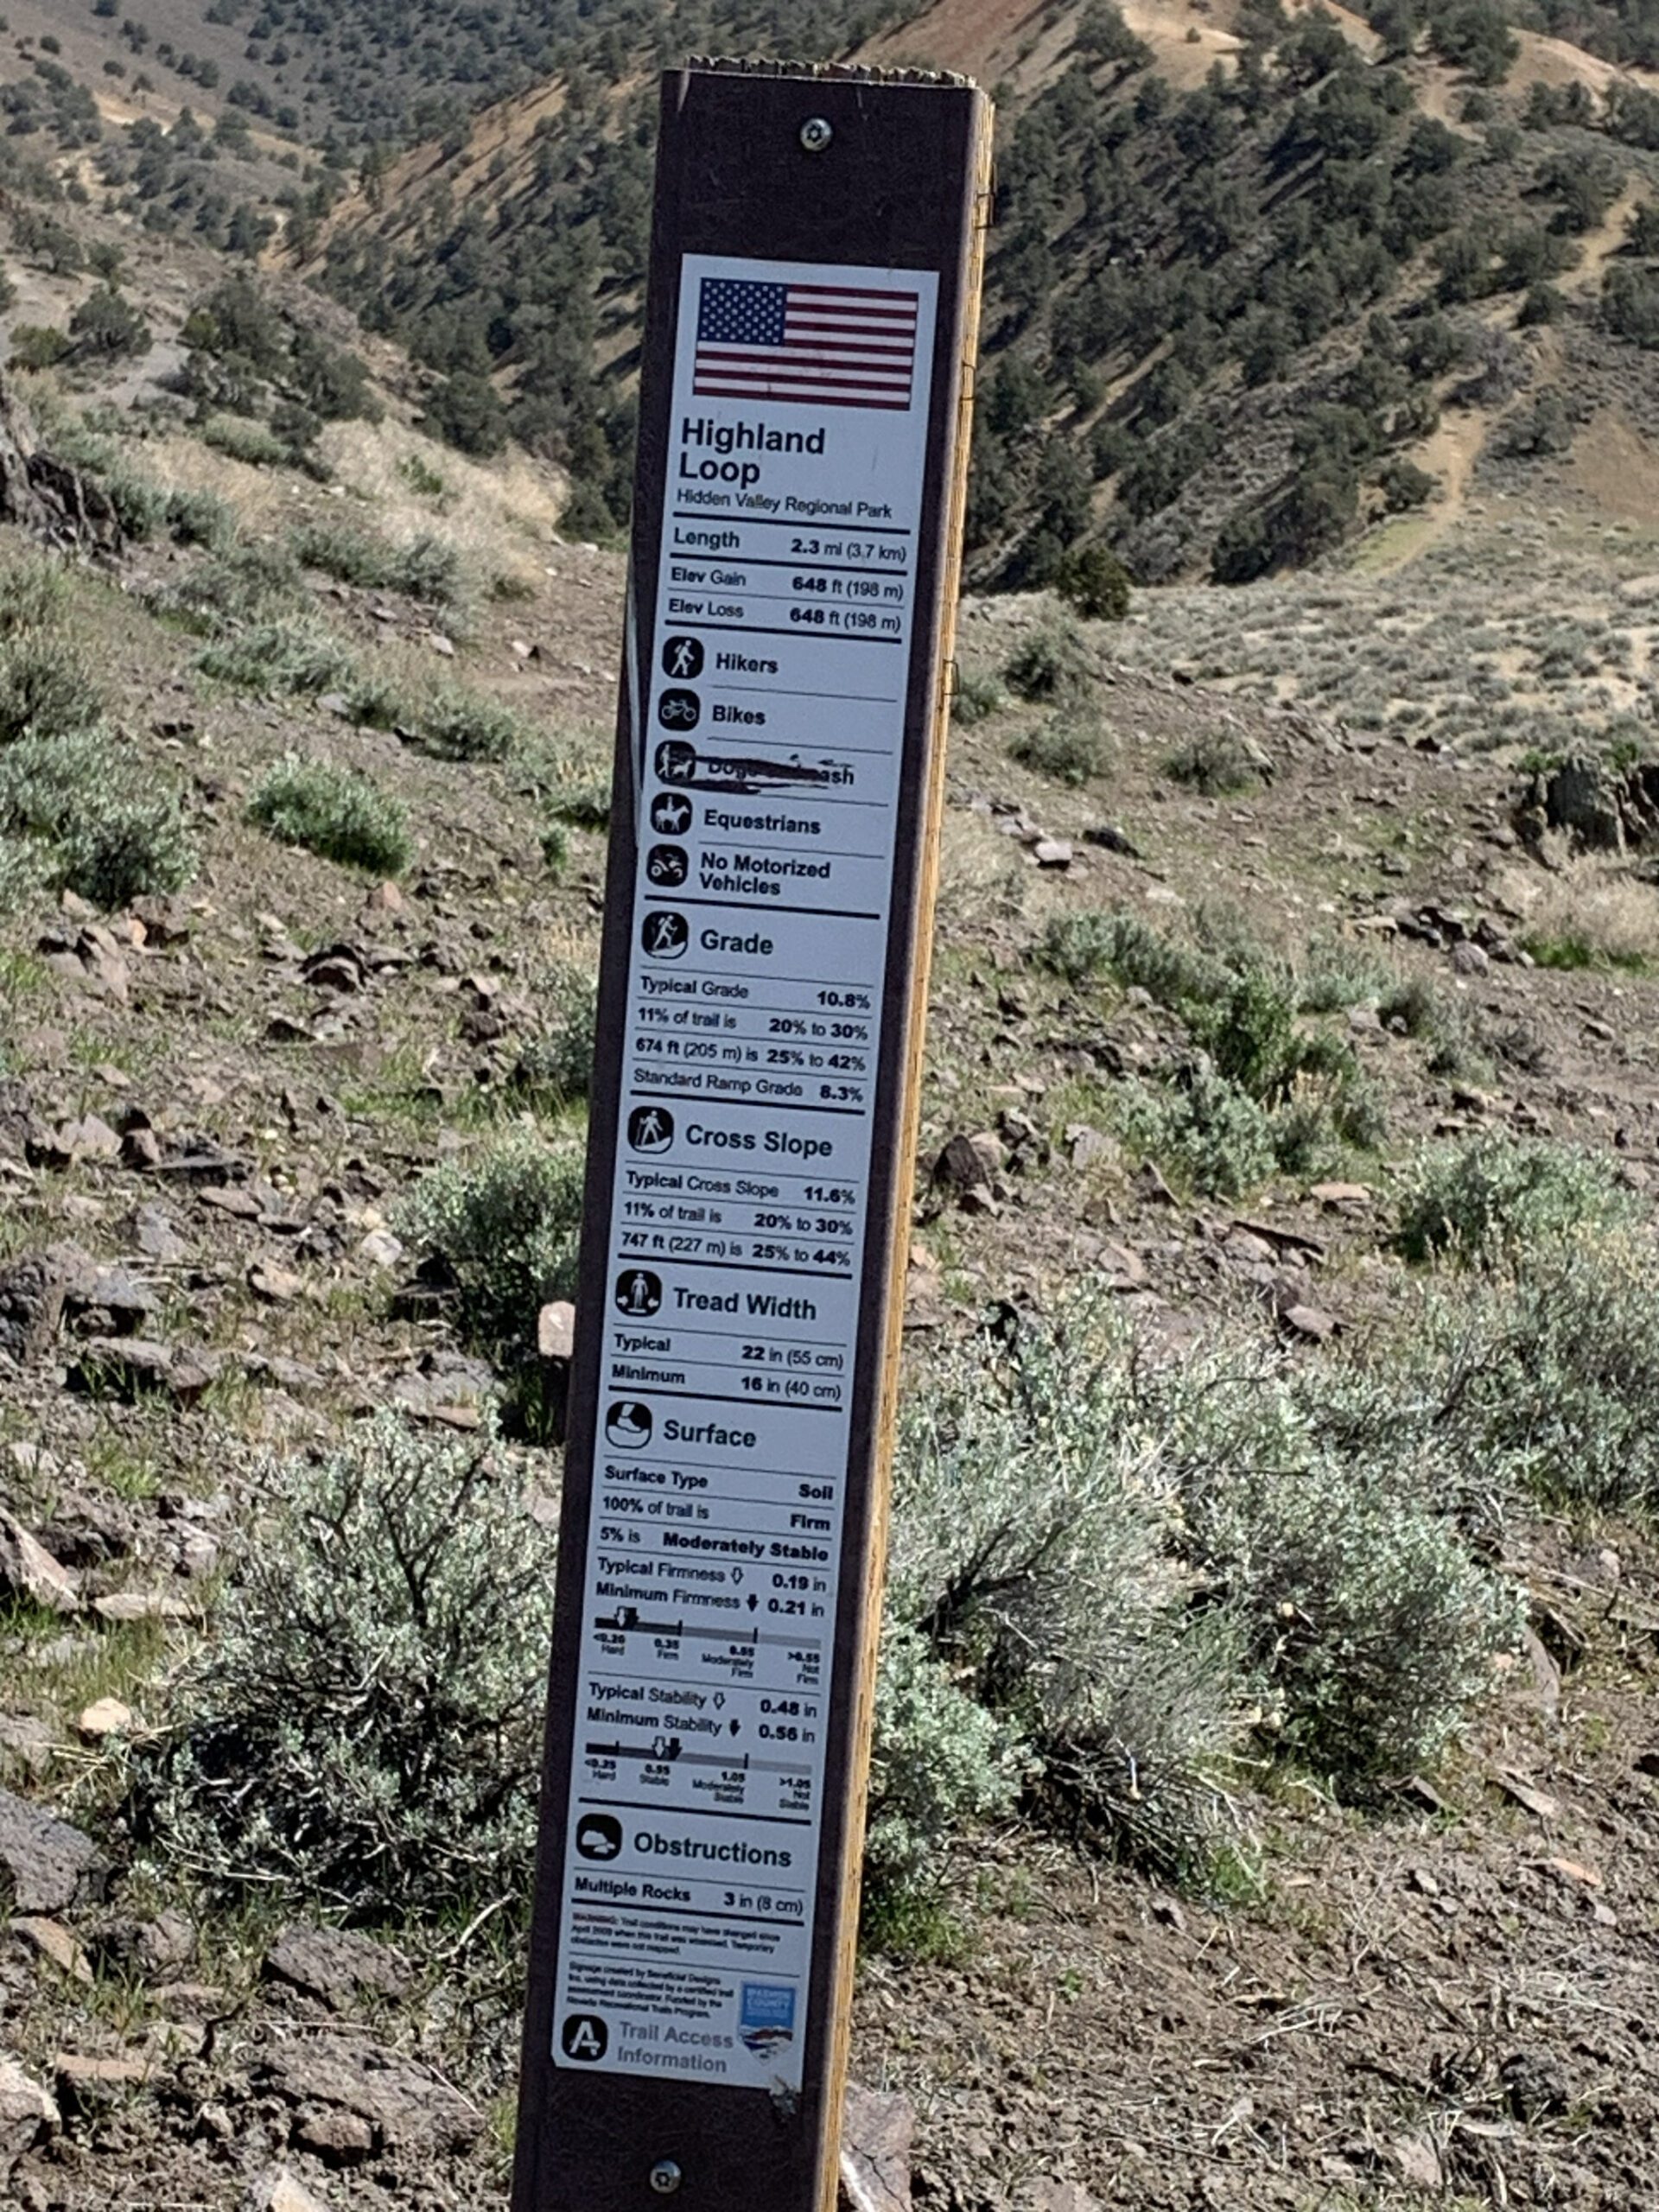 An example of a sign with information useful for mountain bikers using adaptive bikes.